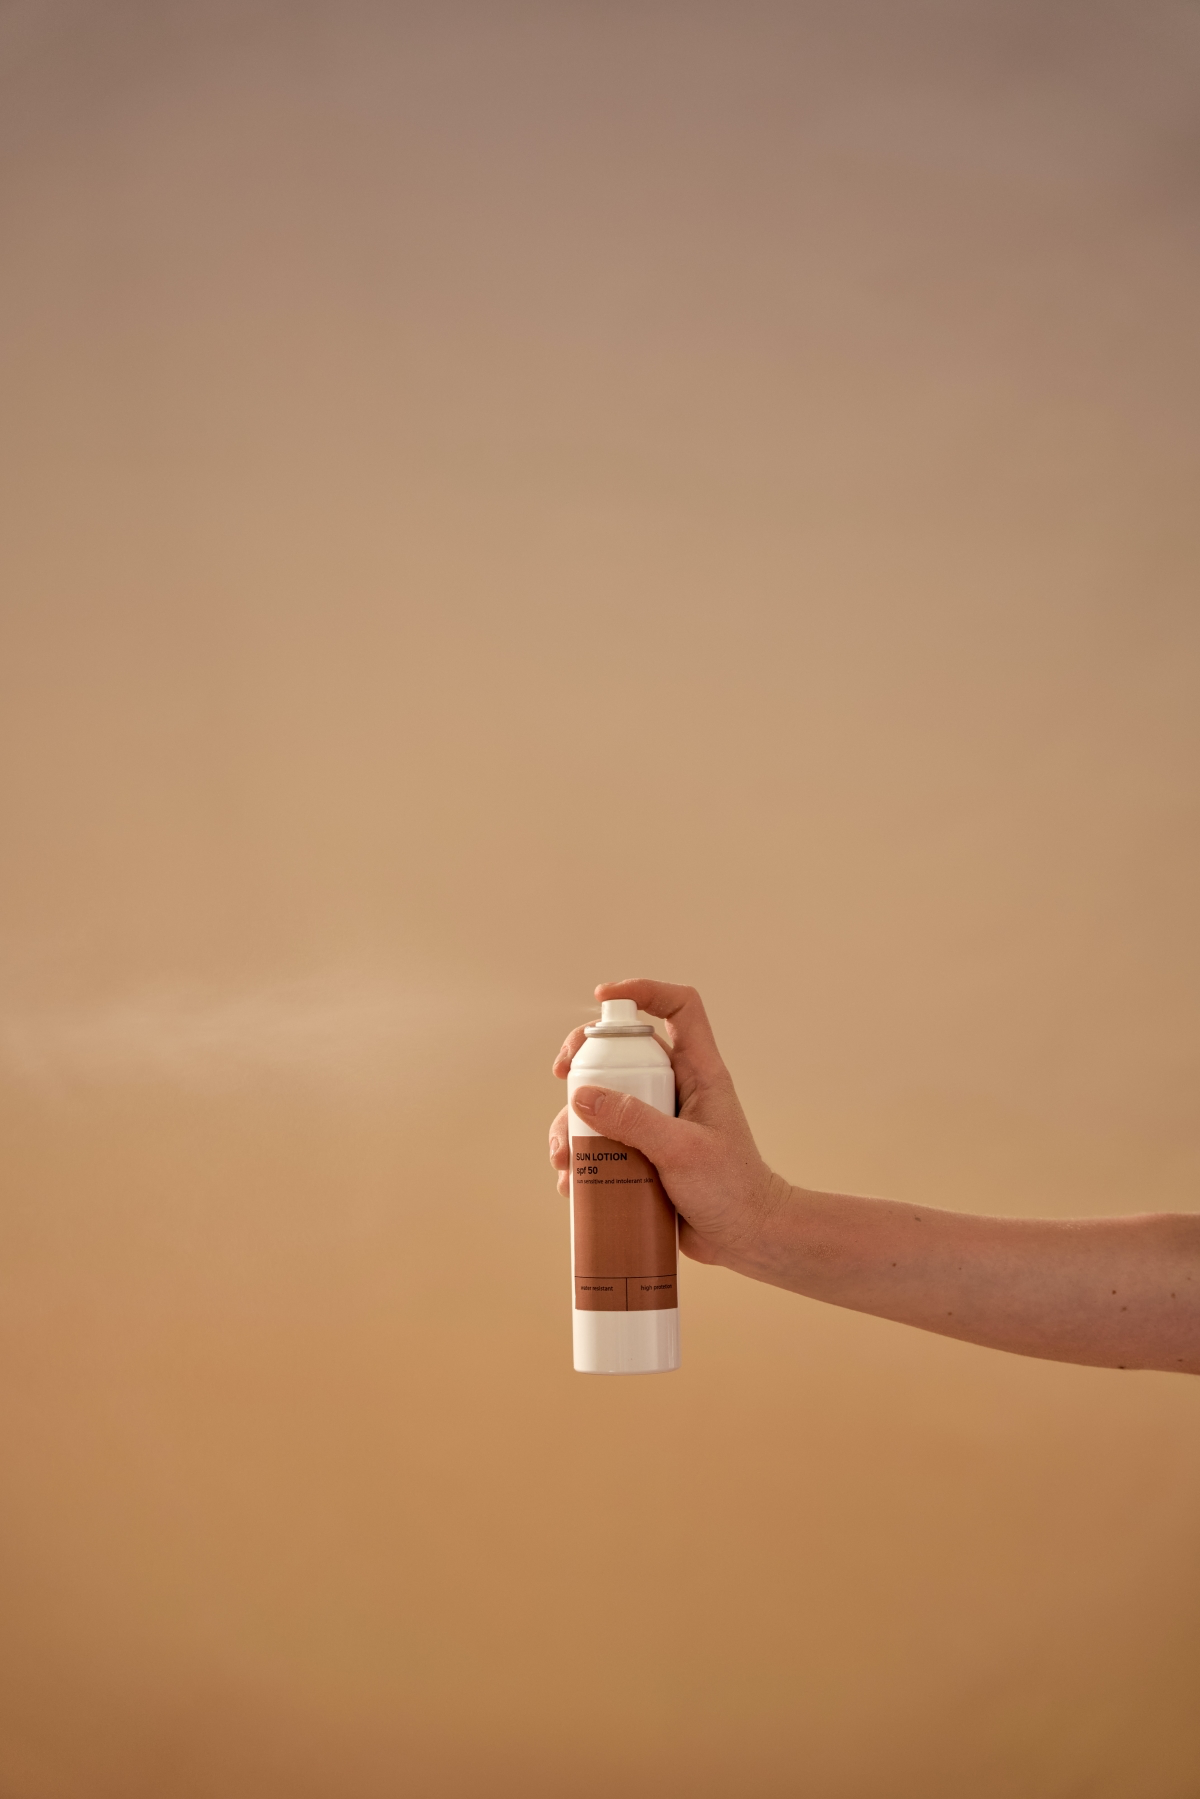 sunscreen and carcinogens how to pick a safe sunscreen